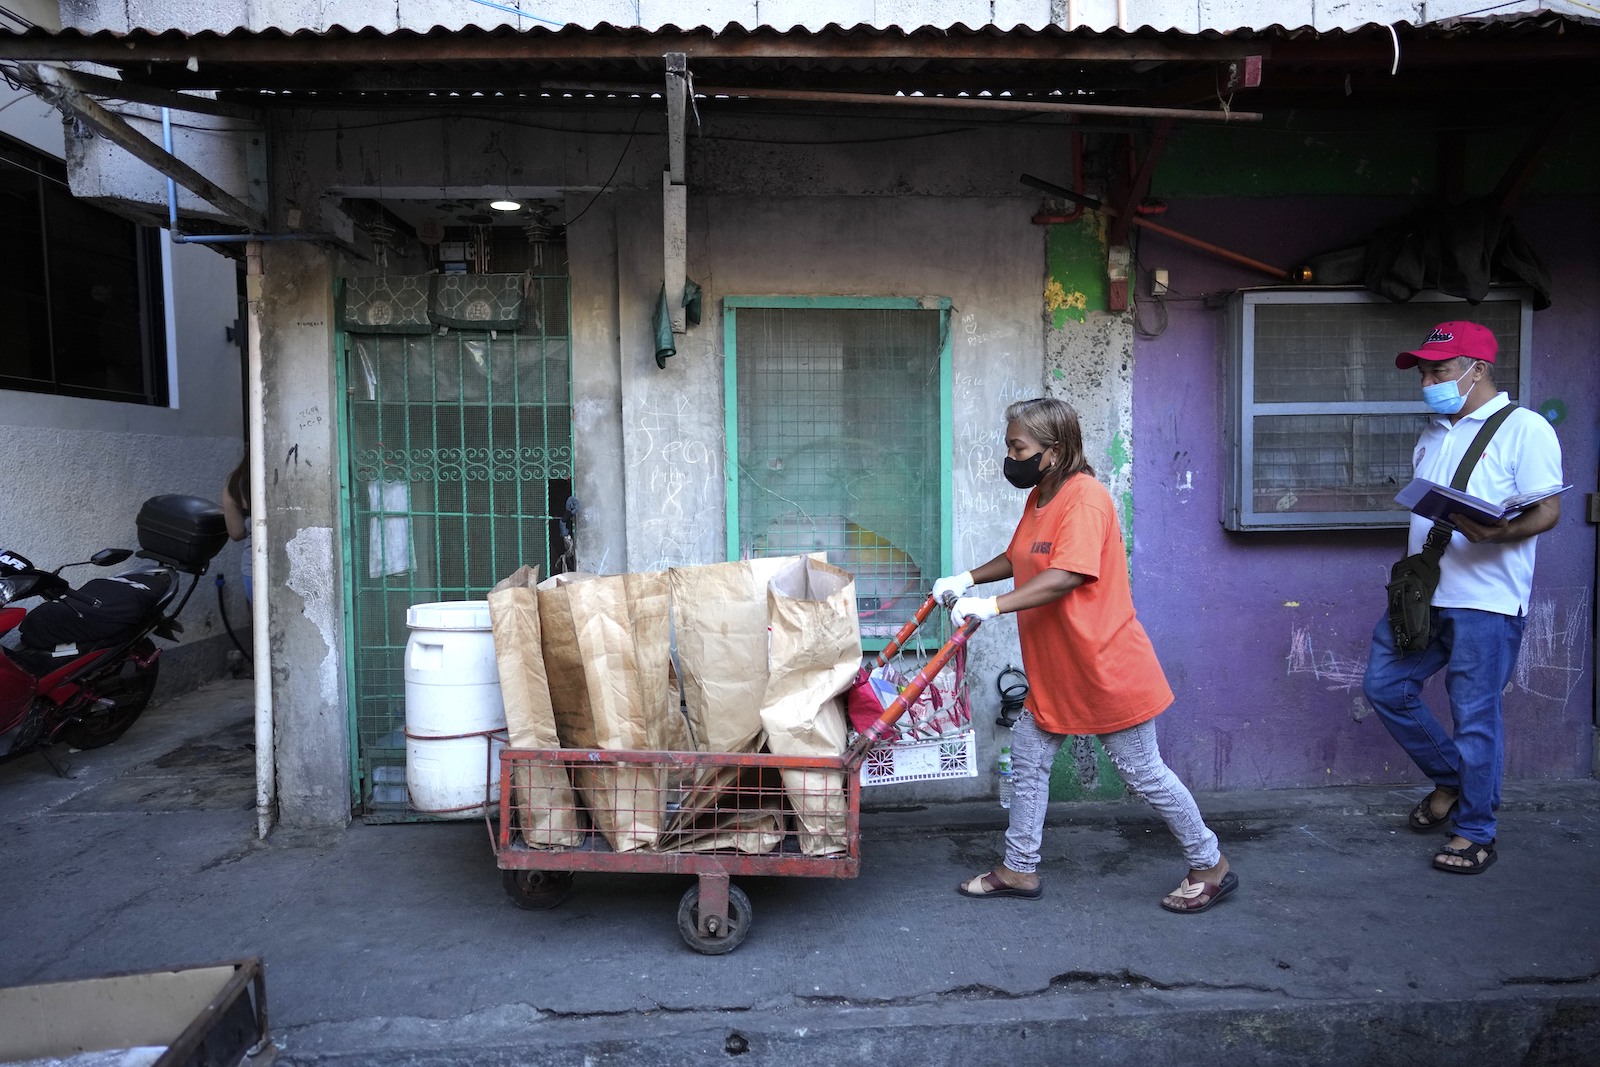 a woman in an orange shirt pushes a cart full of paper bags of trash through a town